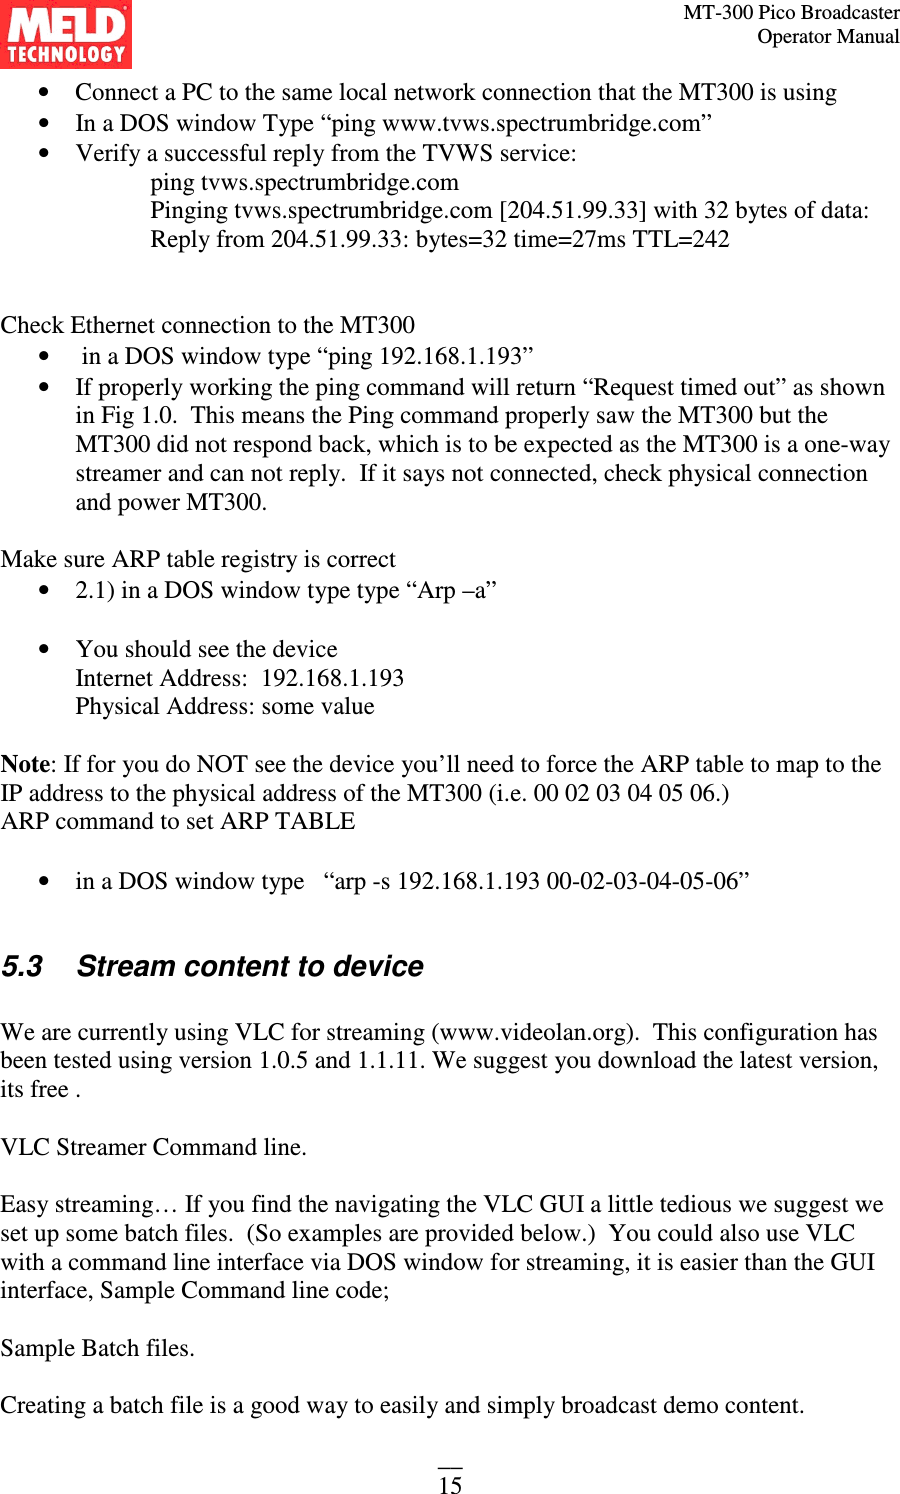 MT-300 Pico Broadcaster                                                                                                                                             Operator Manual __ 15 • Connect a PC to the same local network connection that the MT300 is using • In a DOS window Type “ping www.tvws.spectrumbridge.com” • Verify a successful reply from the TVWS service: ping tvws.spectrumbridge.com Pinging tvws.spectrumbridge.com [204.51.99.33] with 32 bytes of data: Reply from 204.51.99.33: bytes=32 time=27ms TTL=242   Check Ethernet connection to the MT300  •  in a DOS window type “ping 192.168.1.193” • If properly working the ping command will return “Request timed out” as shown in Fig 1.0.  This means the Ping command properly saw the MT300 but the MT300 did not respond back, which is to be expected as the MT300 is a one-way streamer and can not reply.  If it says not connected, check physical connection and power MT300.    Make sure ARP table registry is correct • 2.1) in a DOS window type type “Arp –a”  • You should see the device  Internet Address:  192.168.1.193 Physical Address: some value  Note: If for you do NOT see the device you’ll need to force the ARP table to map to the IP address to the physical address of the MT300 (i.e. 00 02 03 04 05 06.)   ARP command to set ARP TABLE   • in a DOS window type   “arp -s 192.168.1.193 00-02-03-04-05-06”  5.3   Stream content to device  We are currently using VLC for streaming (www.videolan.org).  This configuration has been tested using version 1.0.5 and 1.1.11. We suggest you download the latest version, its free .   VLC Streamer Command line.   Easy streaming… If you find the navigating the VLC GUI a little tedious we suggest we set up some batch files.  (So examples are provided below.)  You could also use VLC with a command line interface via DOS window for streaming, it is easier than the GUI interface, Sample Command line code;   Sample Batch files.   Creating a batch file is a good way to easily and simply broadcast demo content. 